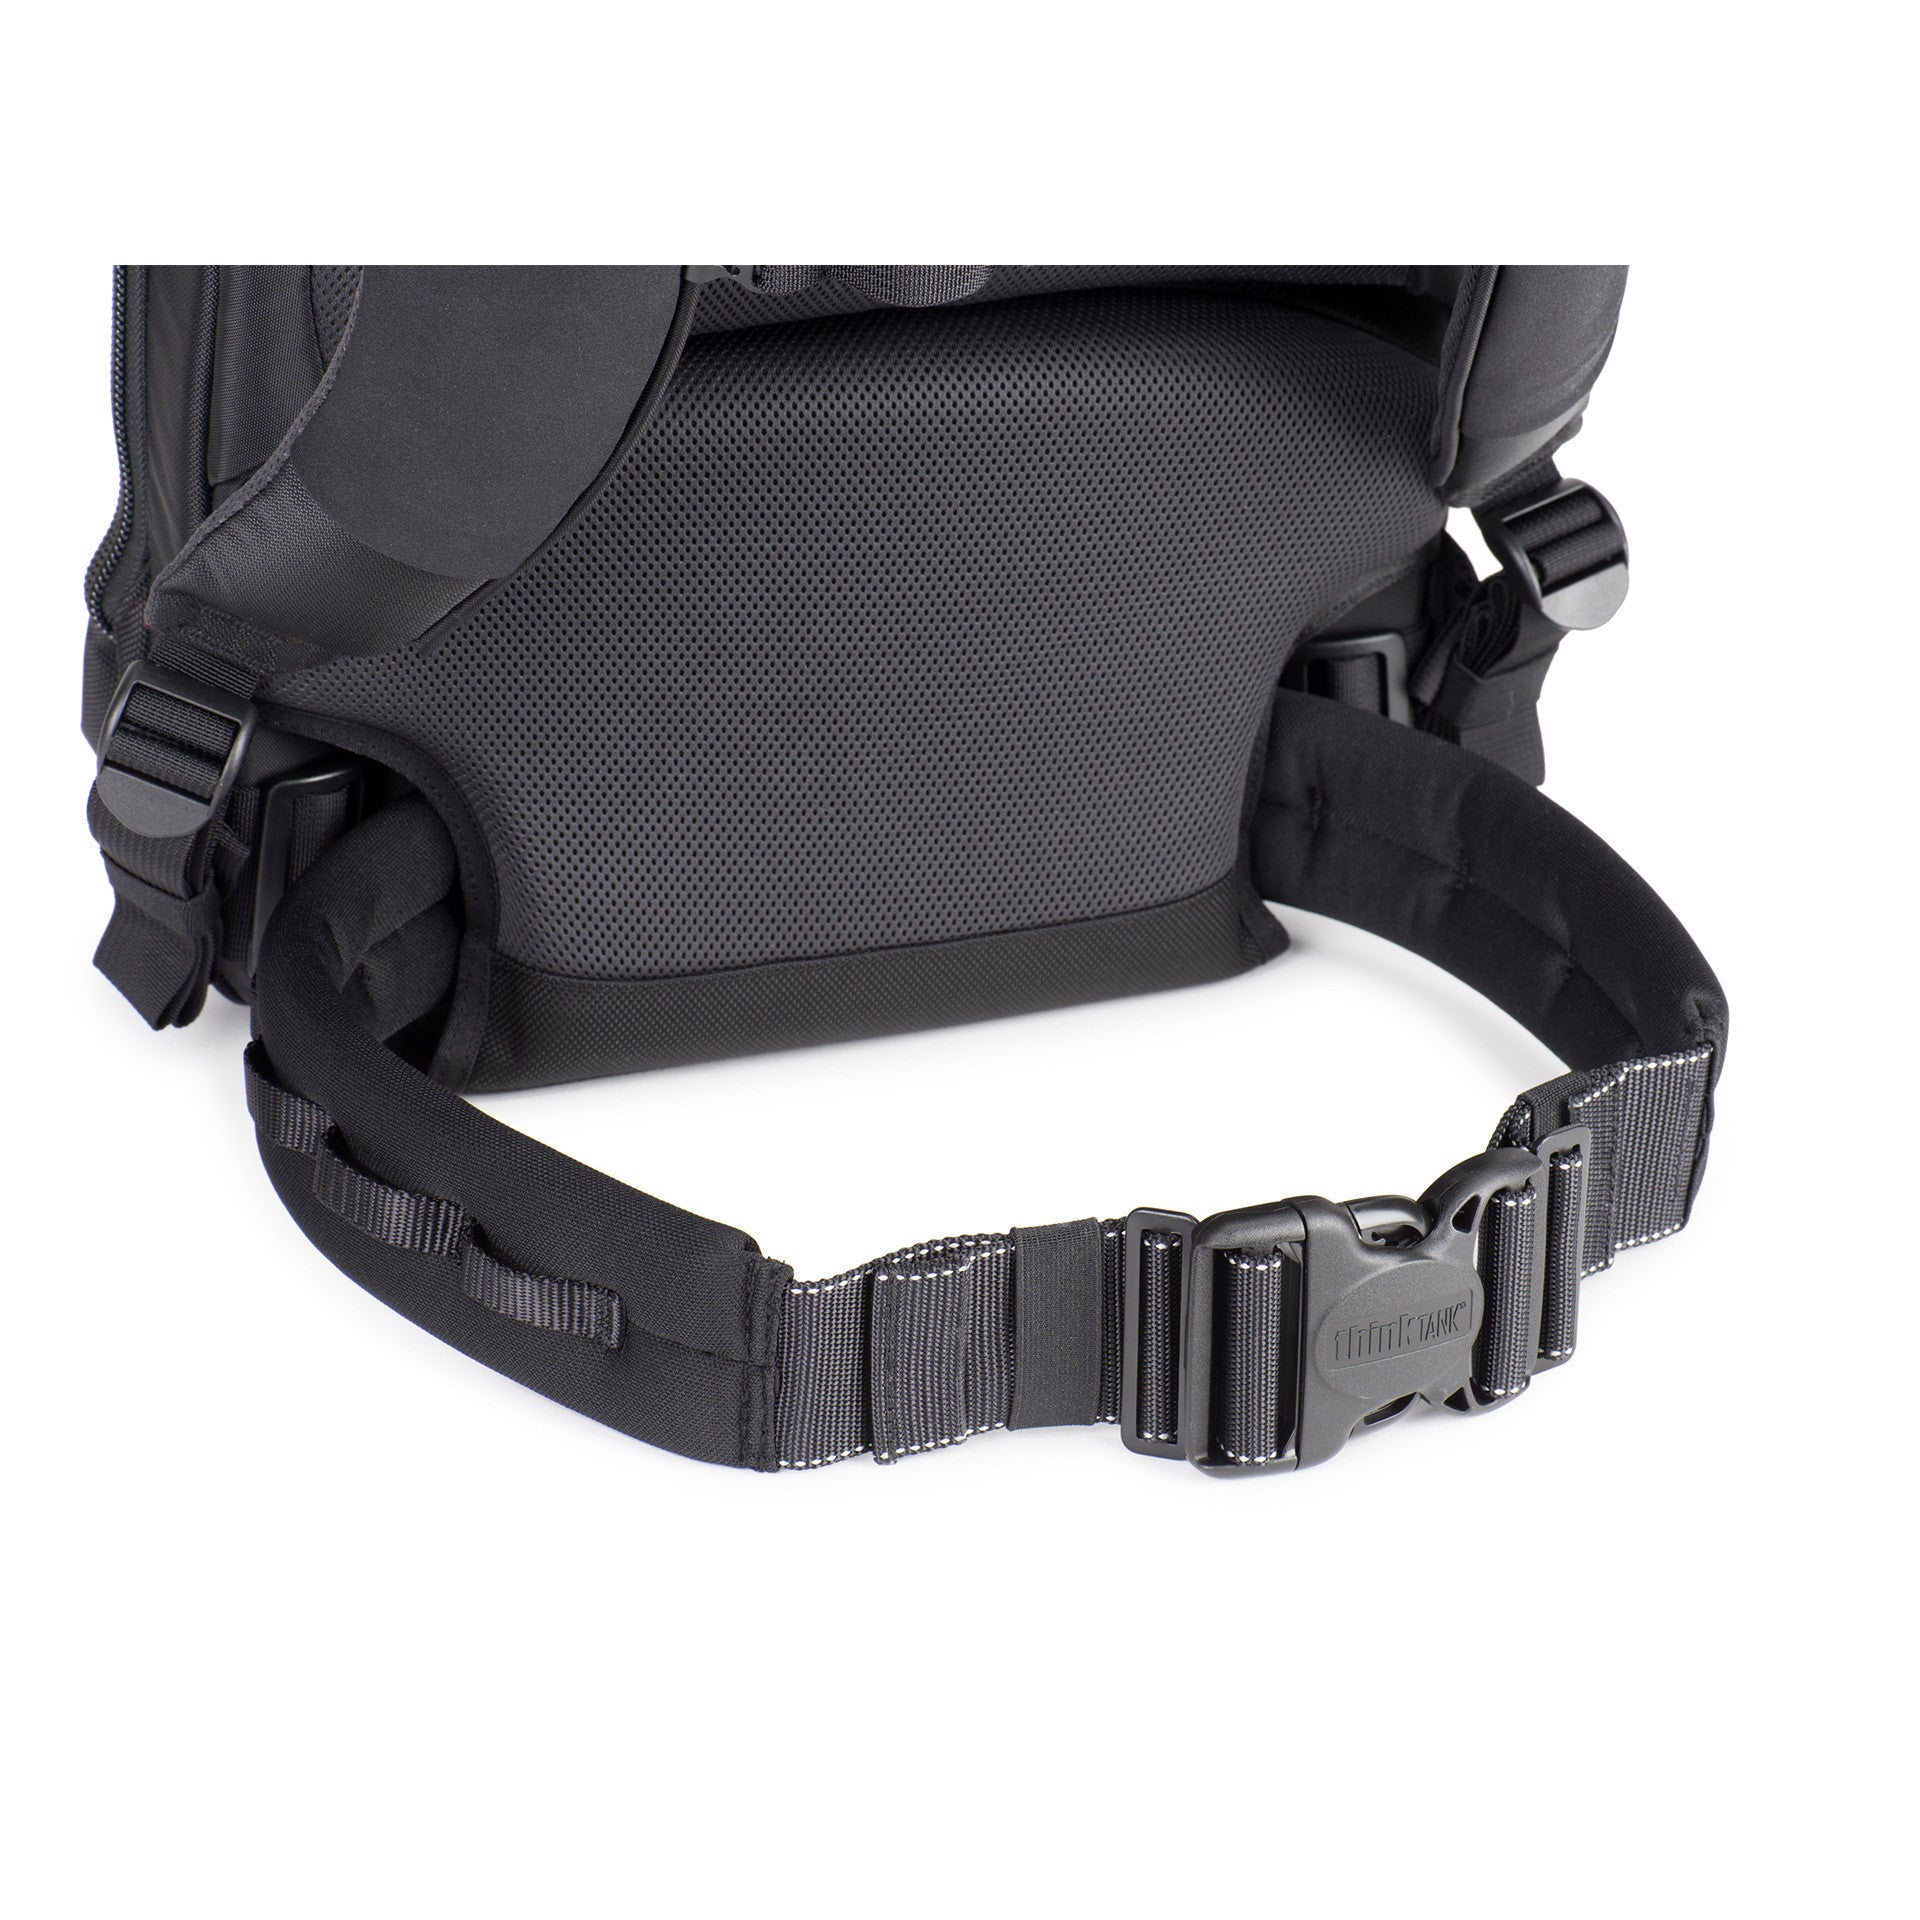 Pro Speed Belt or Thin Skin Belt (sold separately) can be attached